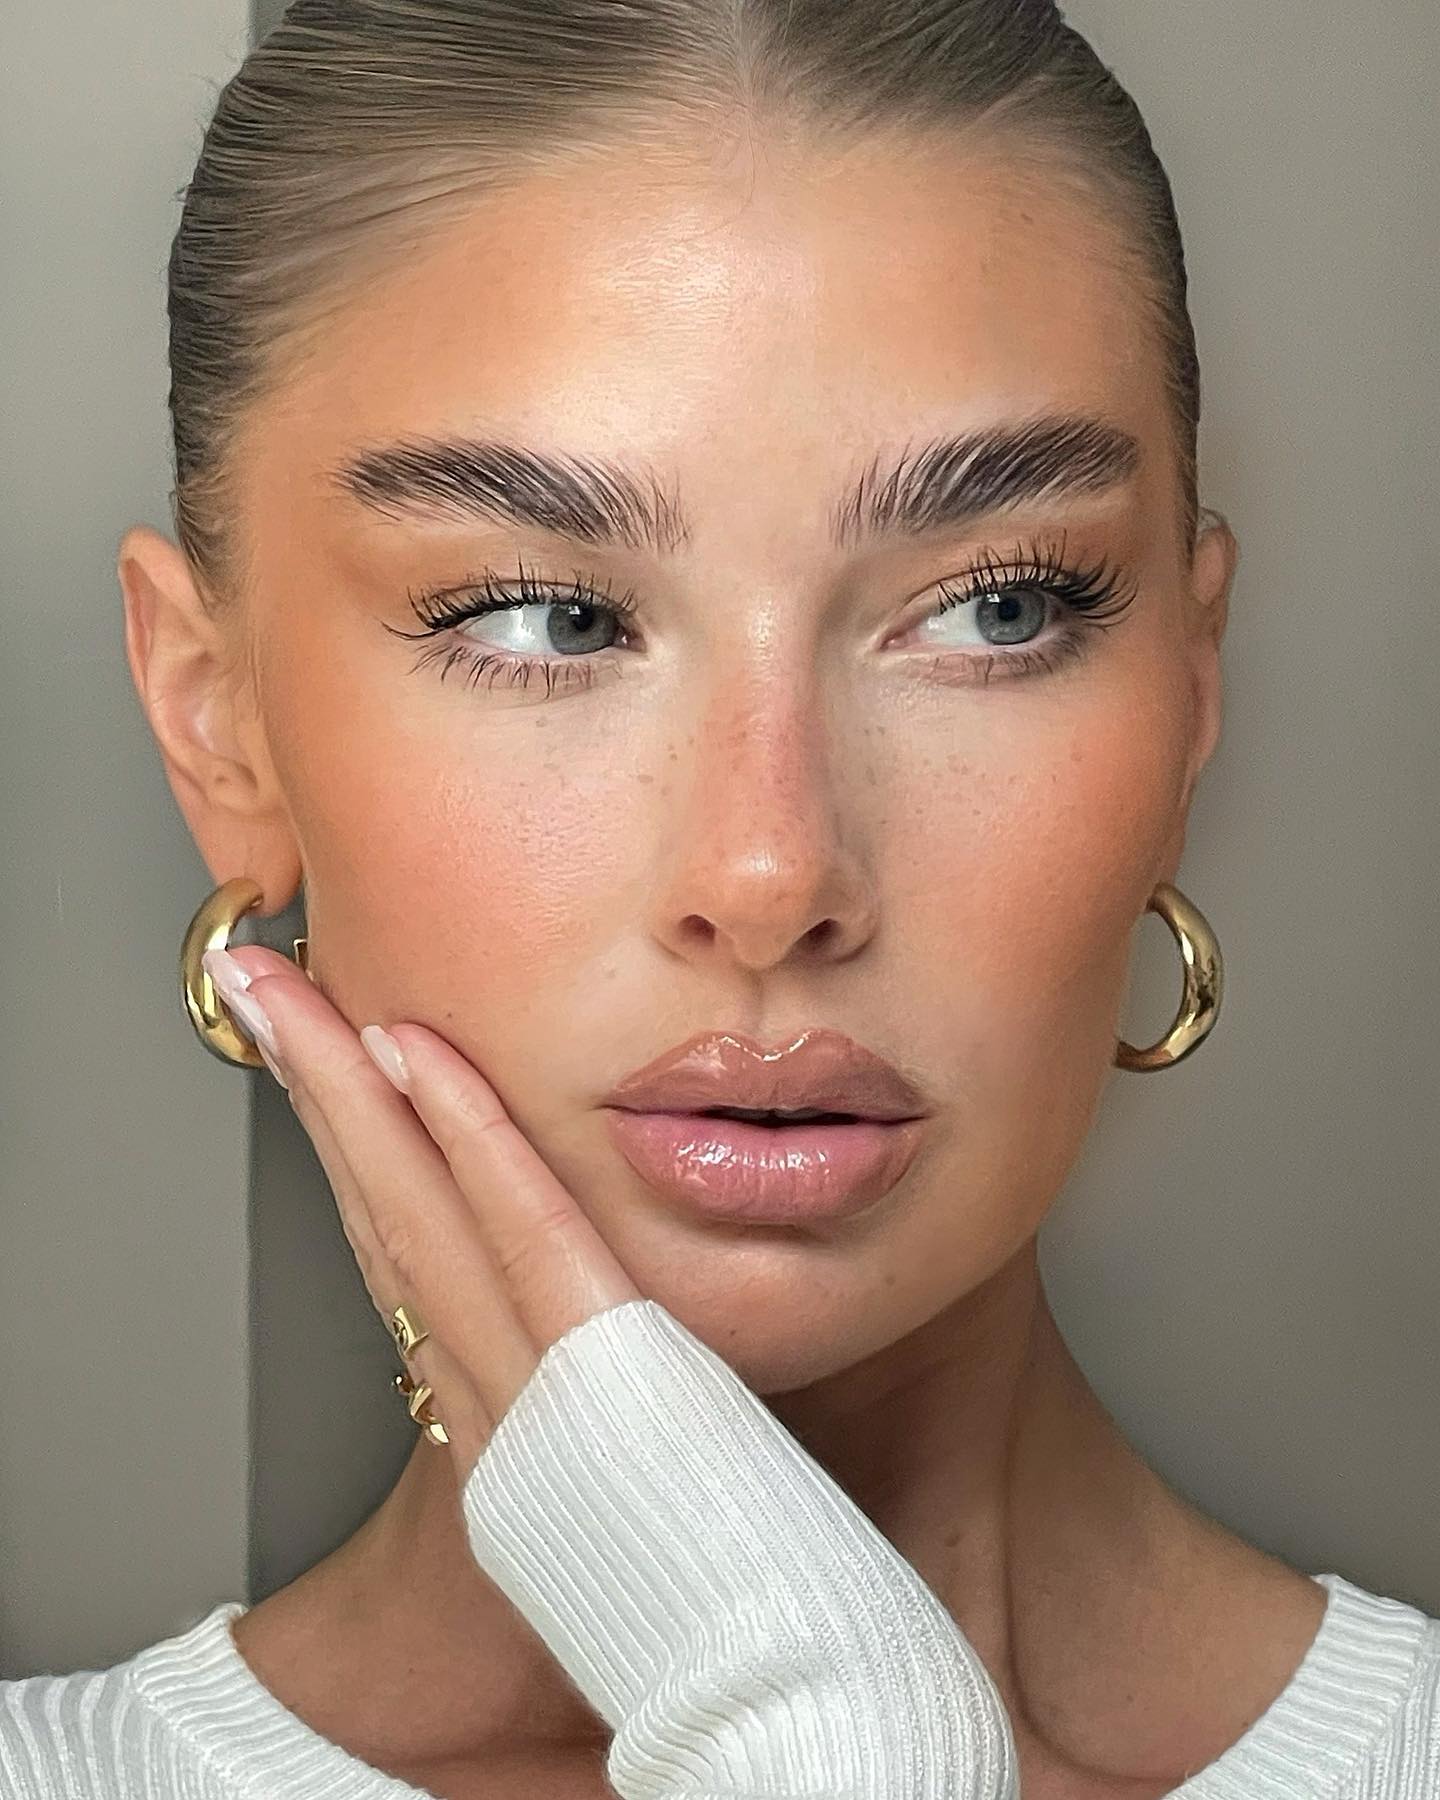 symaskine Drik vand respektfuld The biggest beauty trends you need to know for 2023 - The Daily Guardian